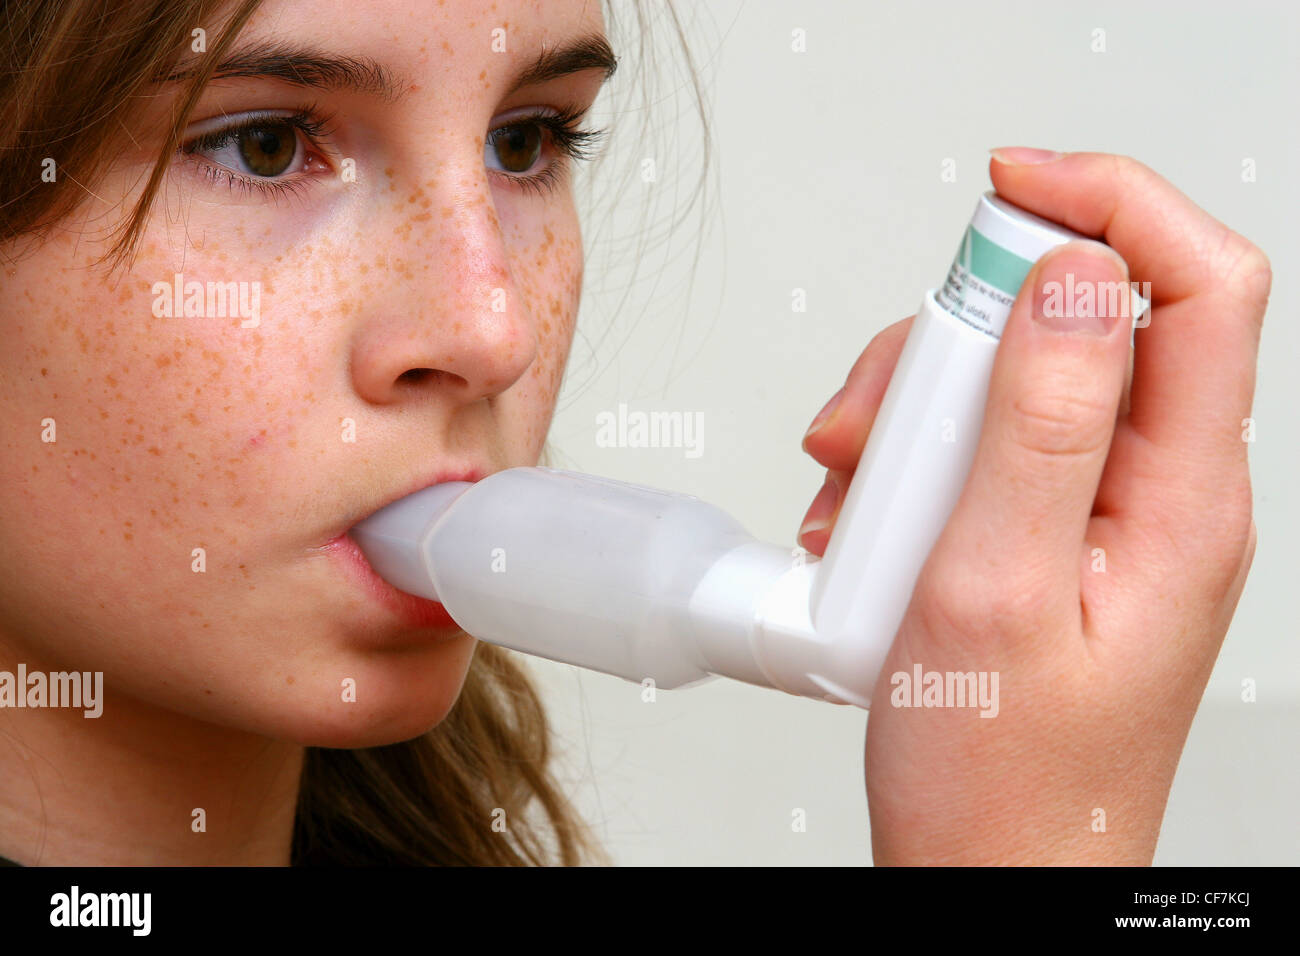 A young female holding an inhaler attachedt to a plastic spacer devise to her face, to treat asthma Stock Photo